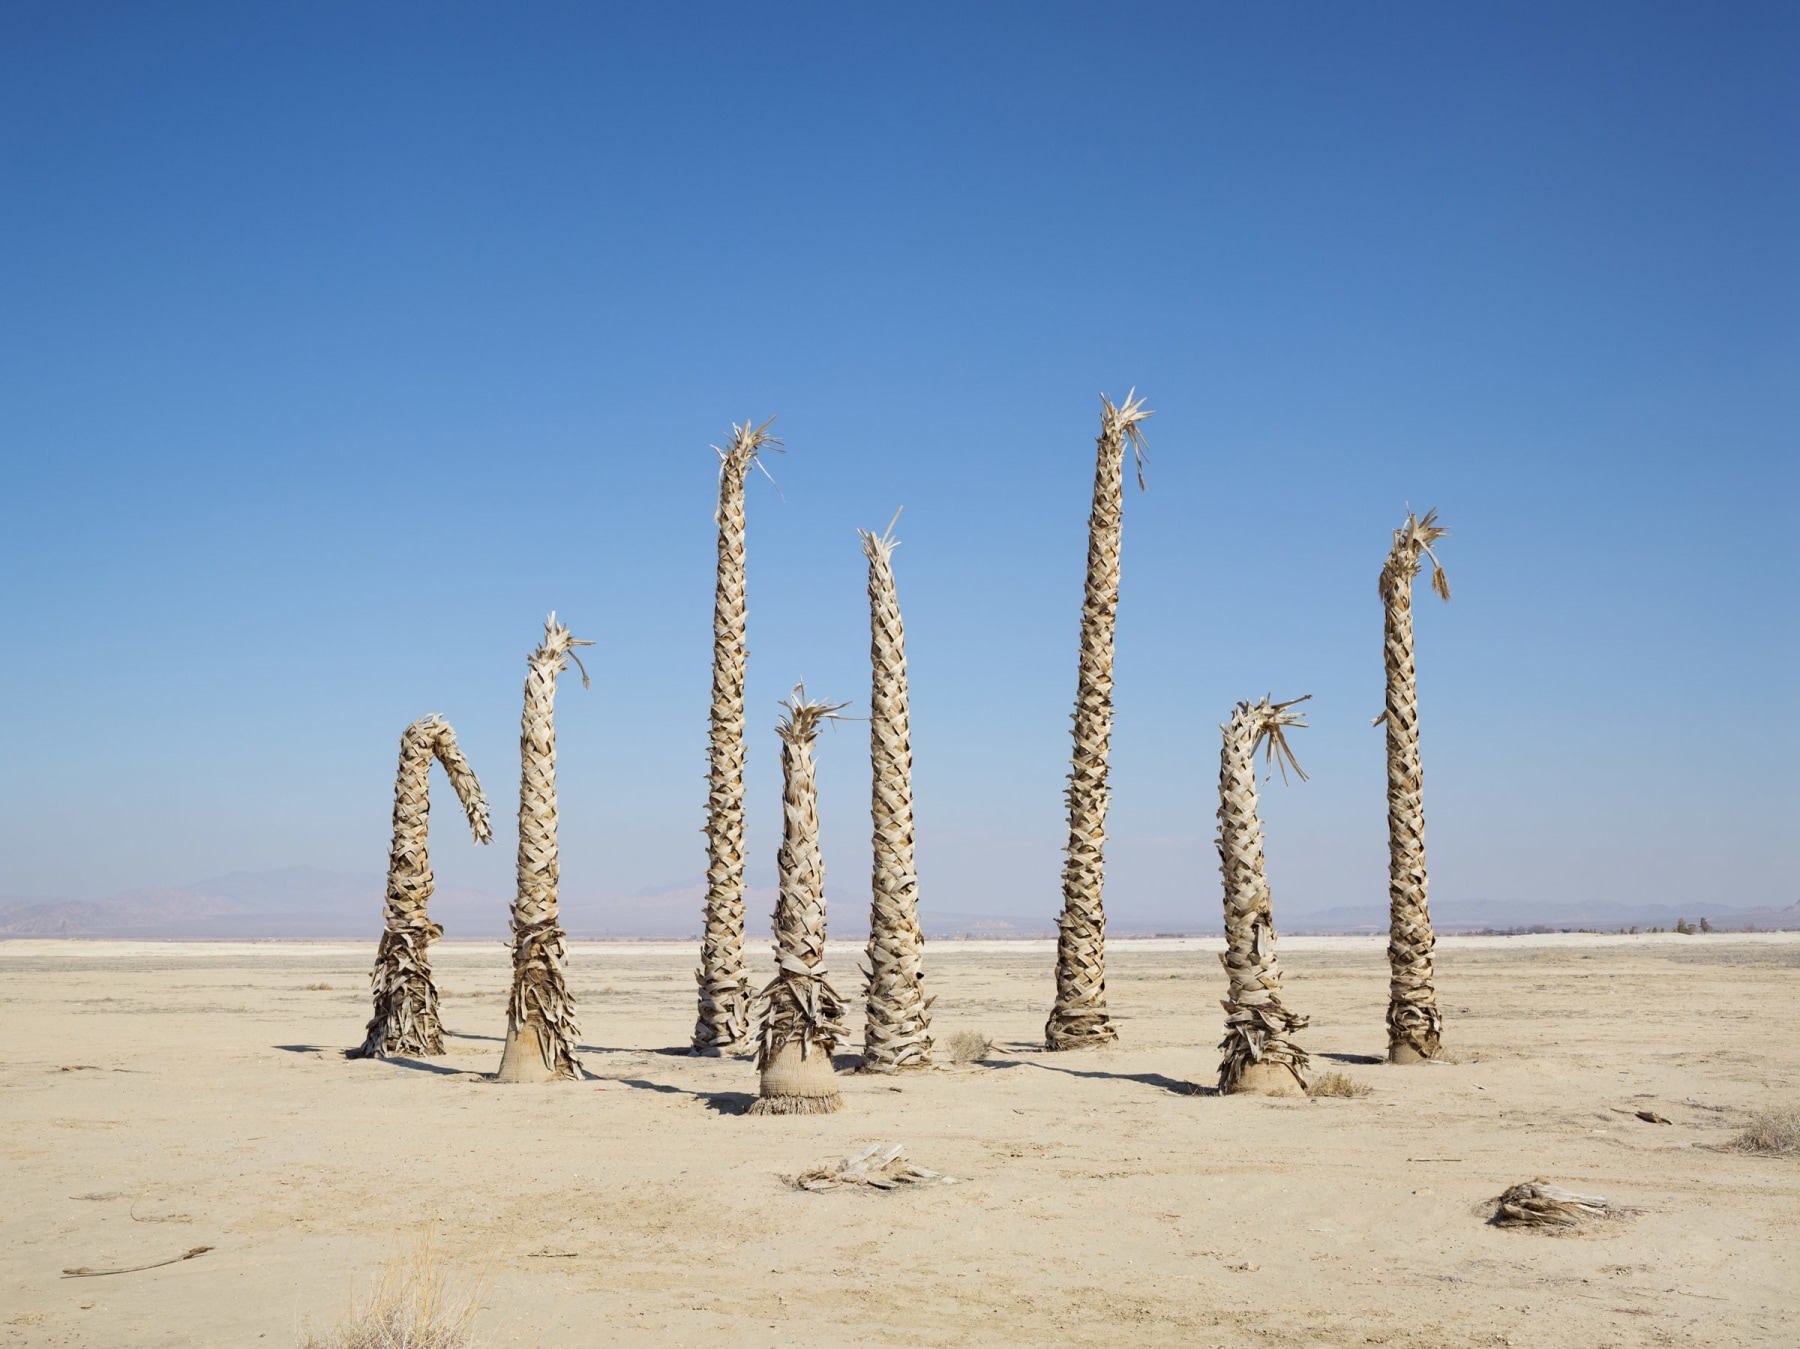 LUCAS FOGLIAPalm Trees without Water, California, 2014
